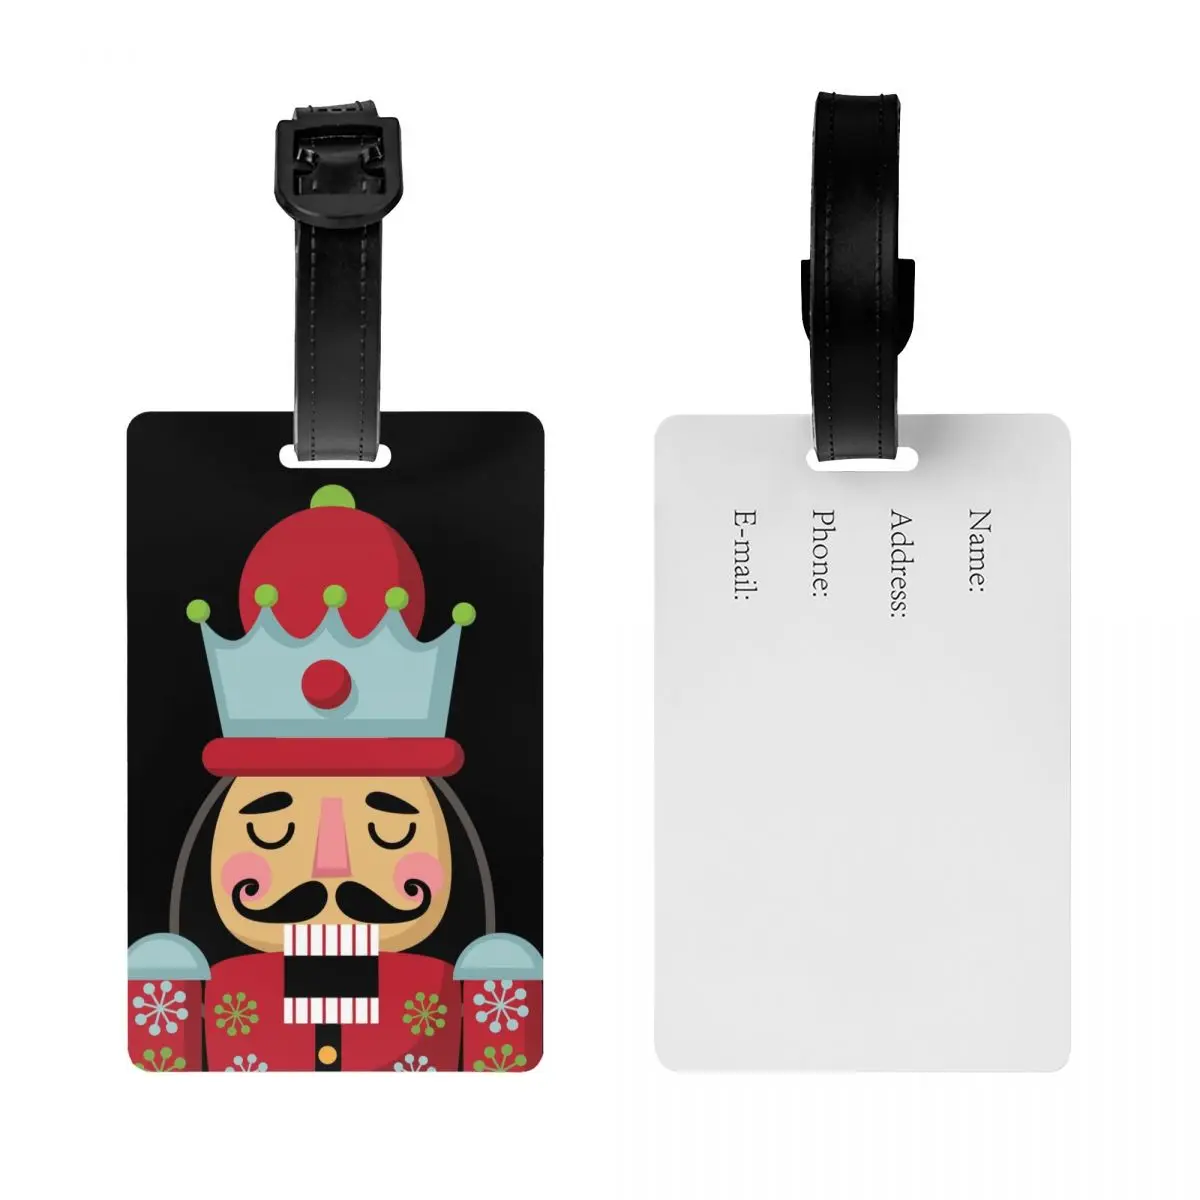 Nutcracker Luggage Tag Cartoon Soldier Toy Christmas Gift Suitcase Baggage Privacy Cover ID Label